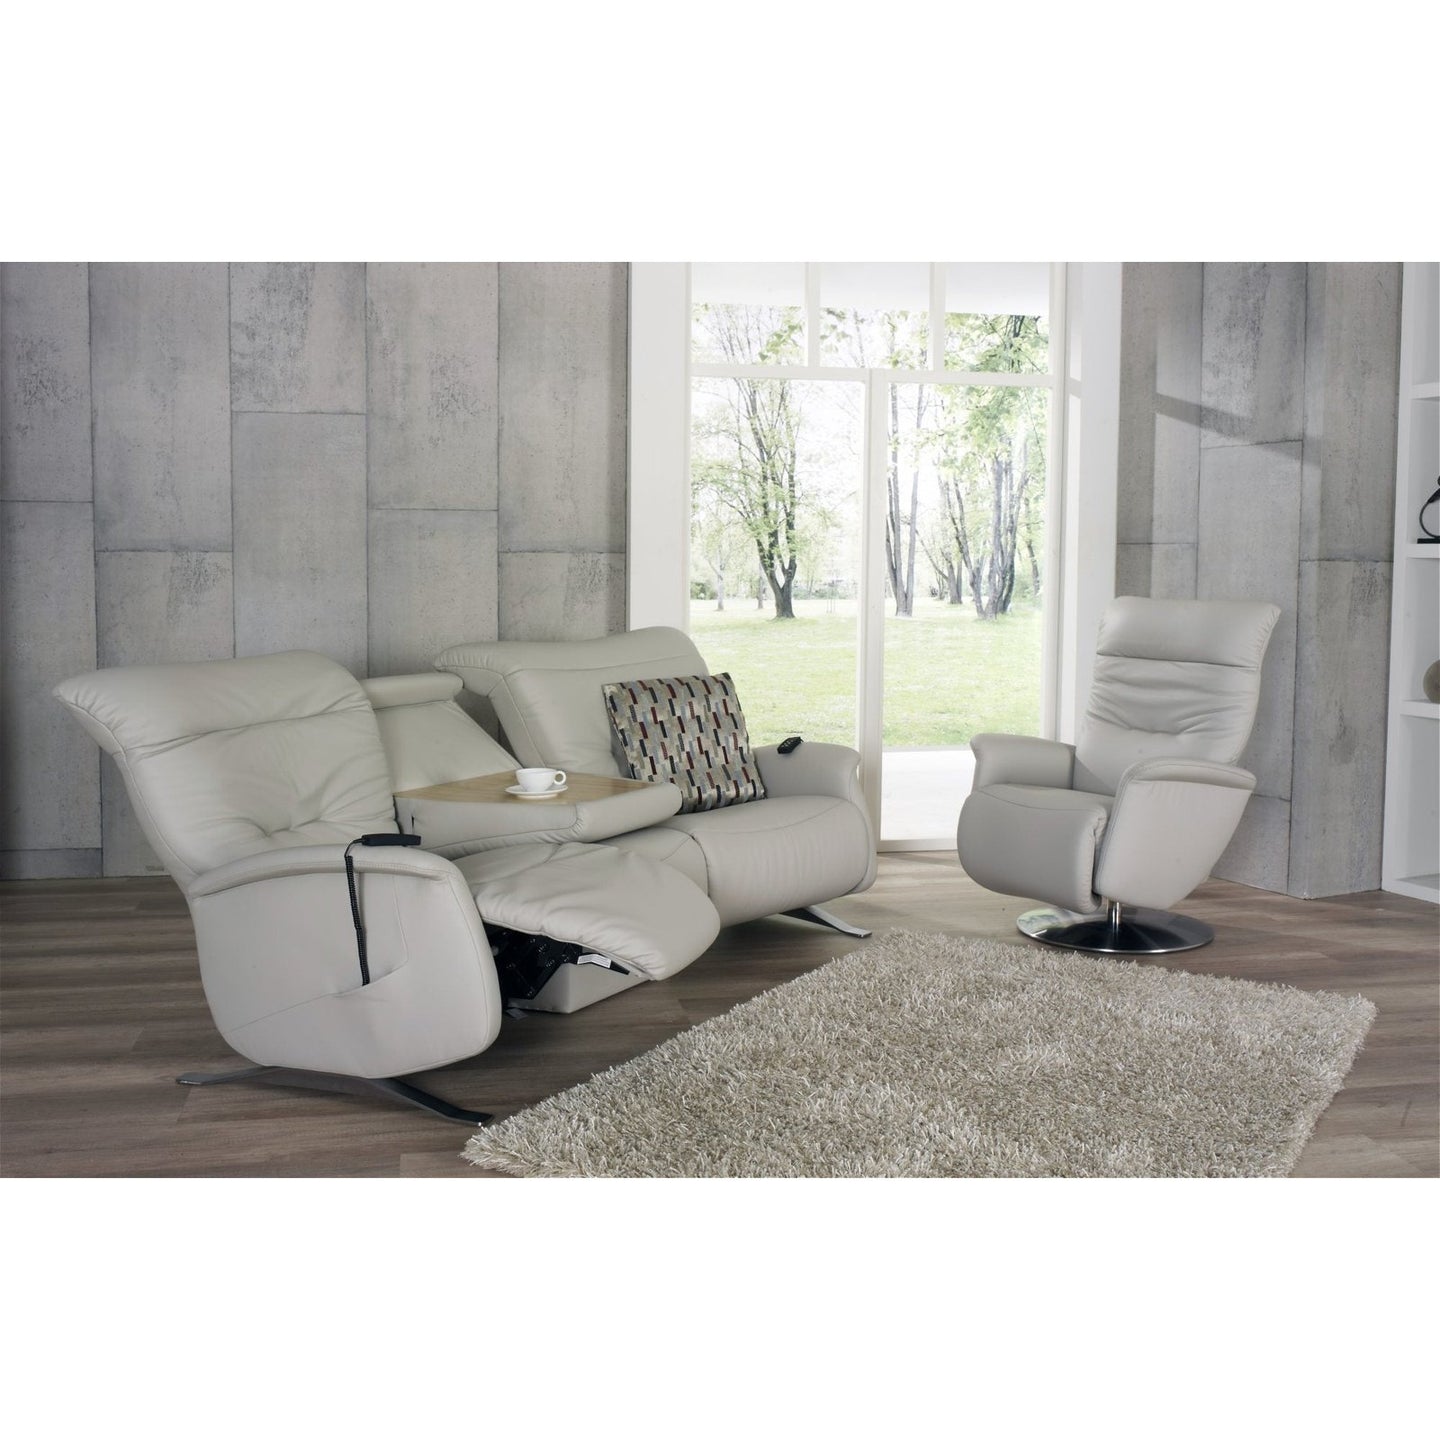 Himolla Cygnet 3 Seater Sofa with Table